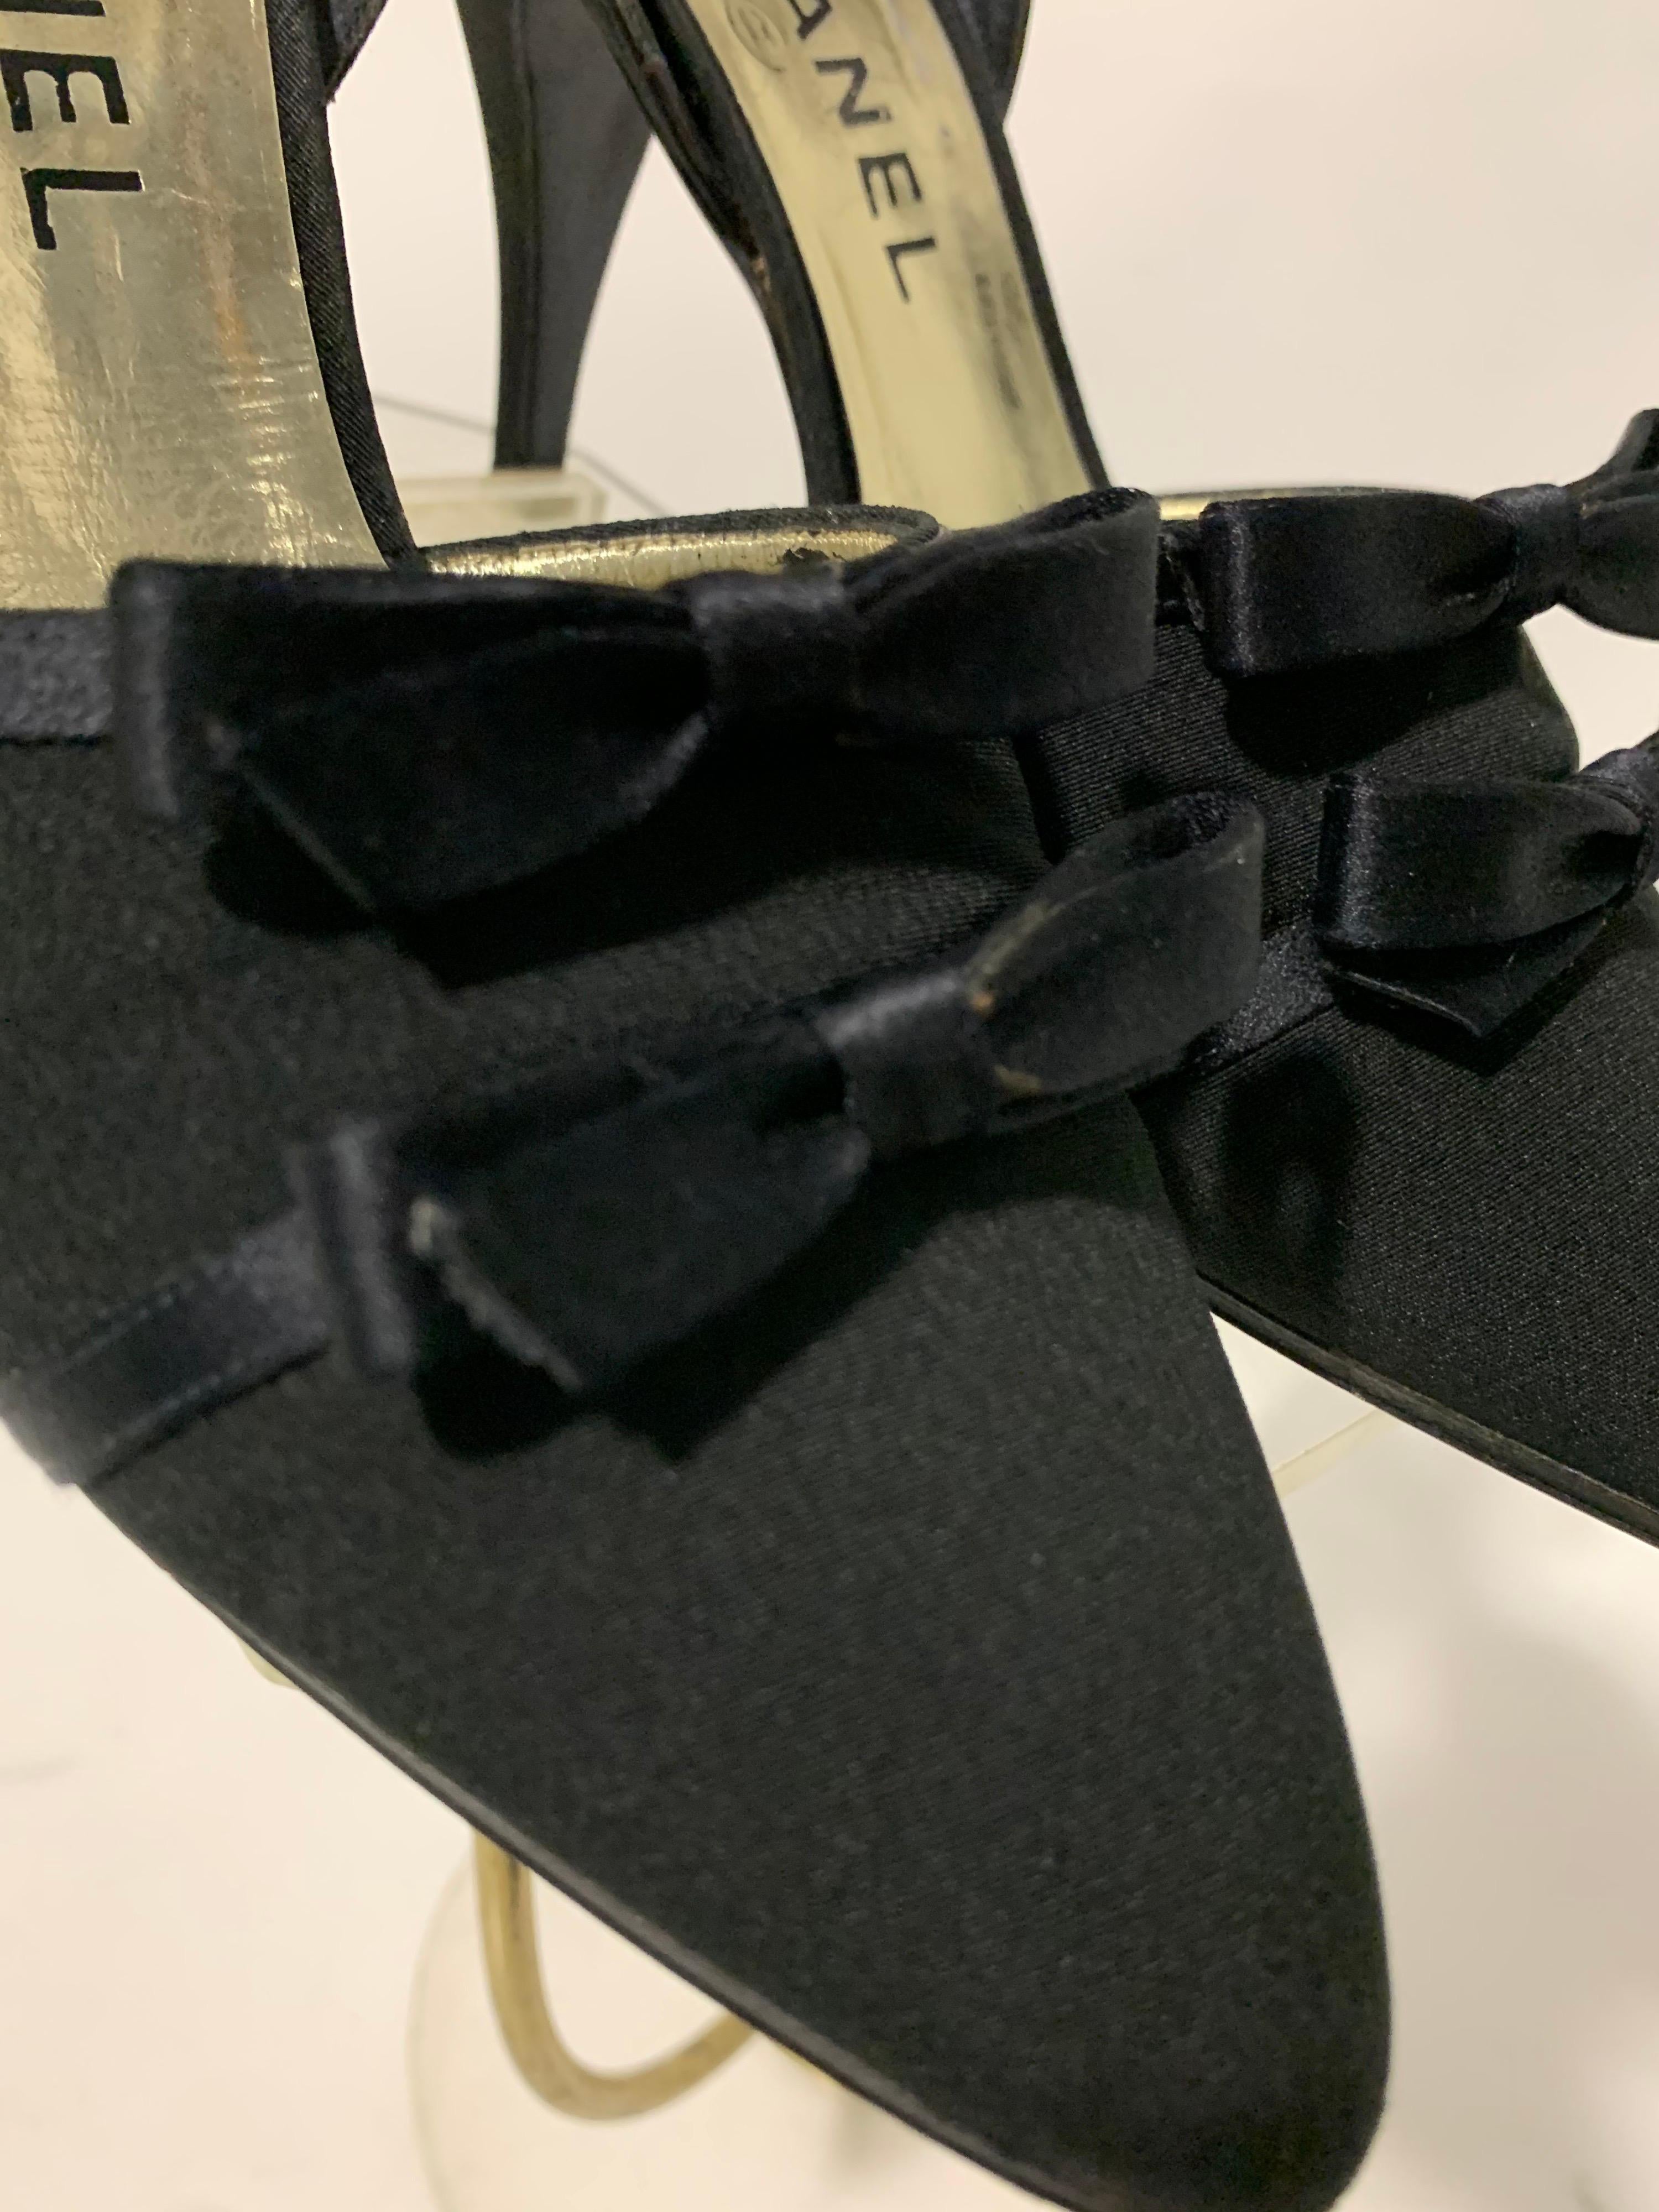 1980 Chanel Black Silk Fabric Slingback Shoe W/Satin Bows Size 7M For Sale 4